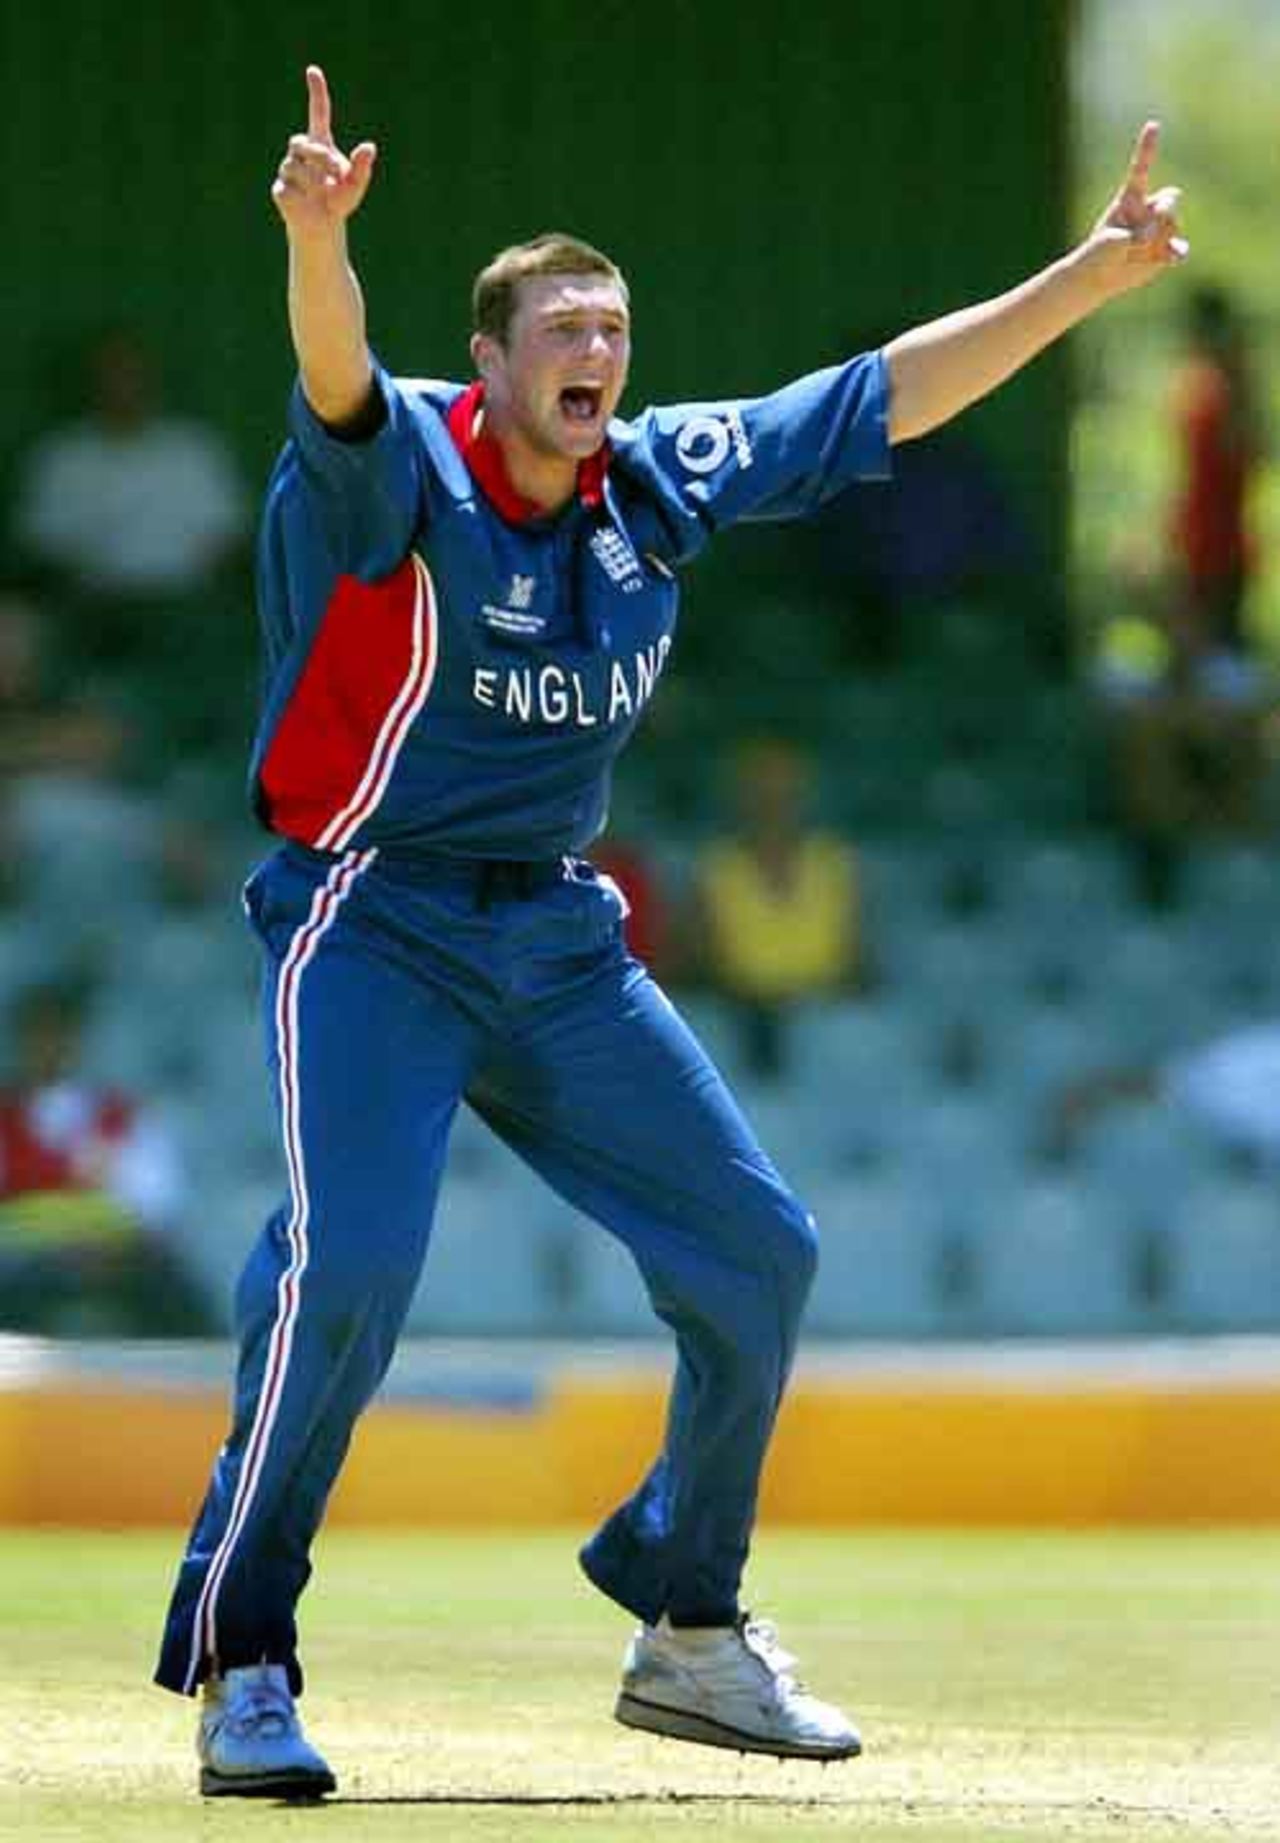 England's Stephen Harmison appeals and gets the wicket of Border Bears Craig Sugden LBW during their World Cup warm up match against Border Bears at Buffalo Park in East London, South Africa, February 6, 2003.